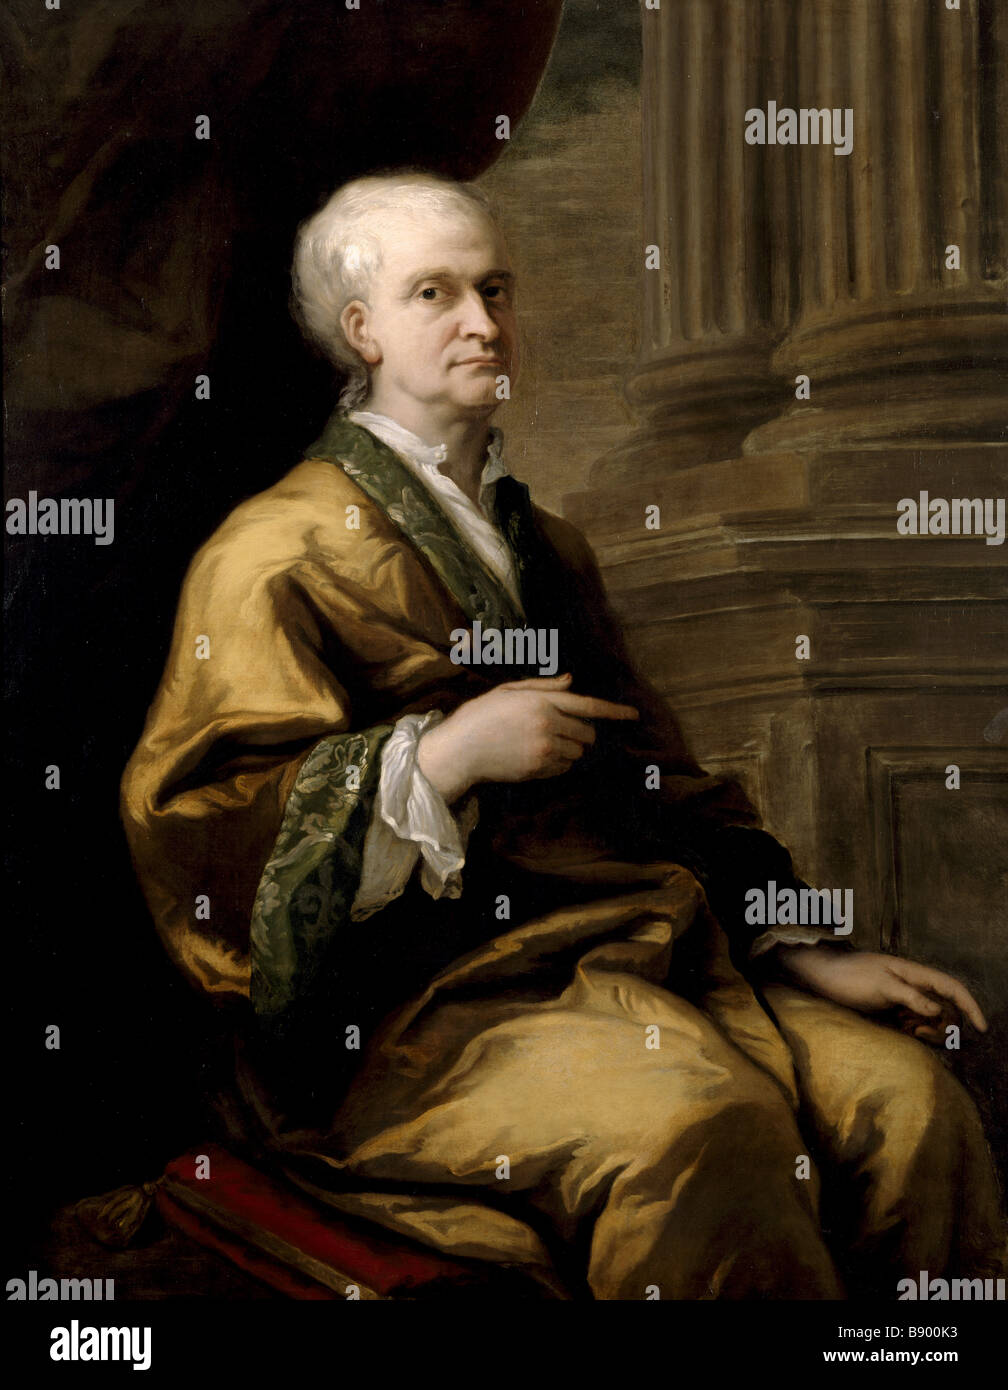 ISAAC NEWTON, a portrait by Sir James Thornhill (1675-1734) painted c.1709-12, in the Study at Woolsthorpe Manor. Stock Photo